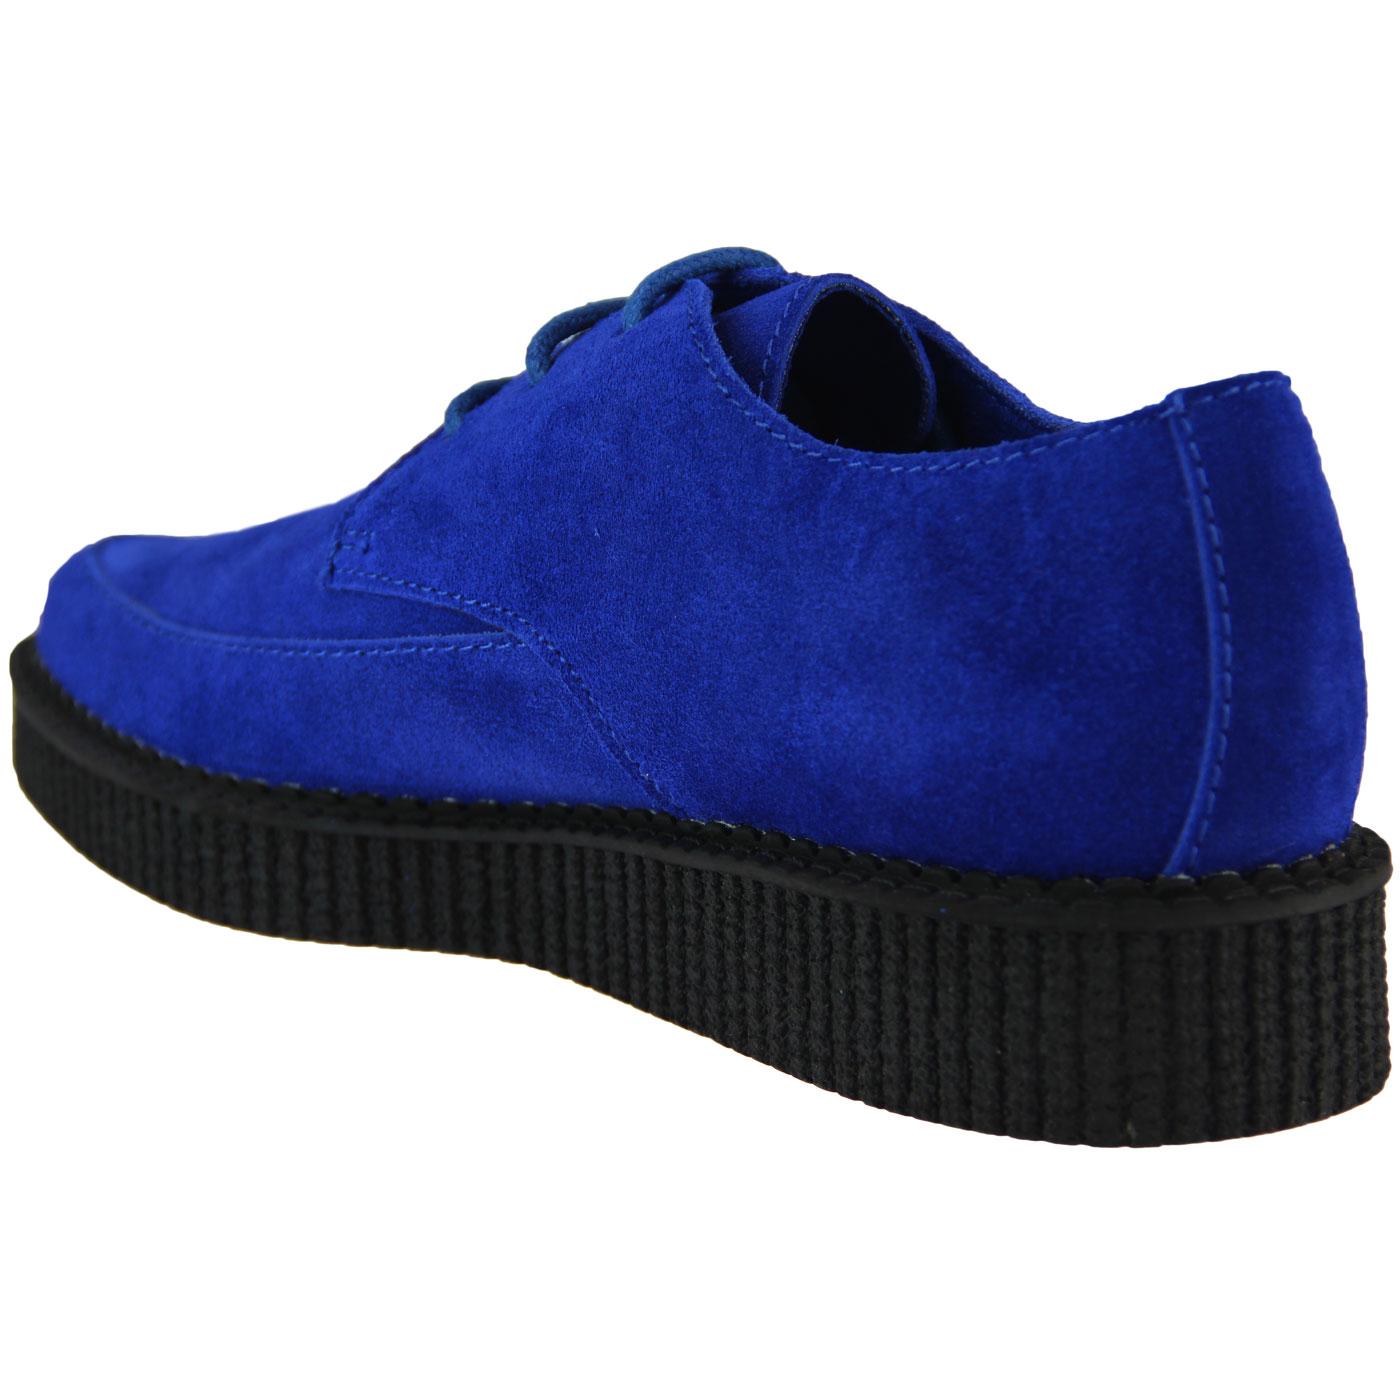 New Rare Retro Hand Made Uk Shoes Blue Suede Lepoard Creepers Rock Punk 